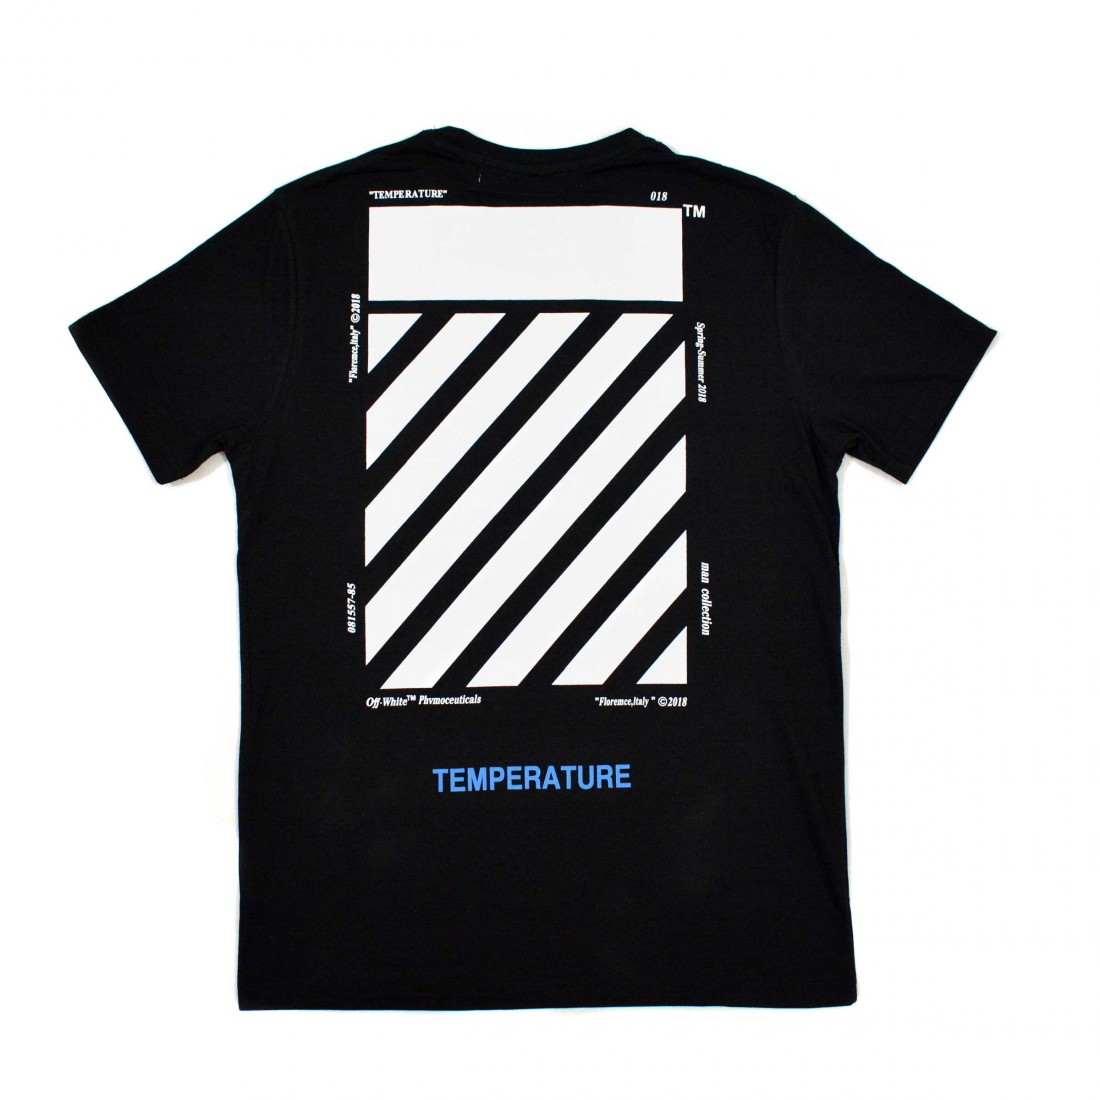 Buy > off white temperature tee white > in stock